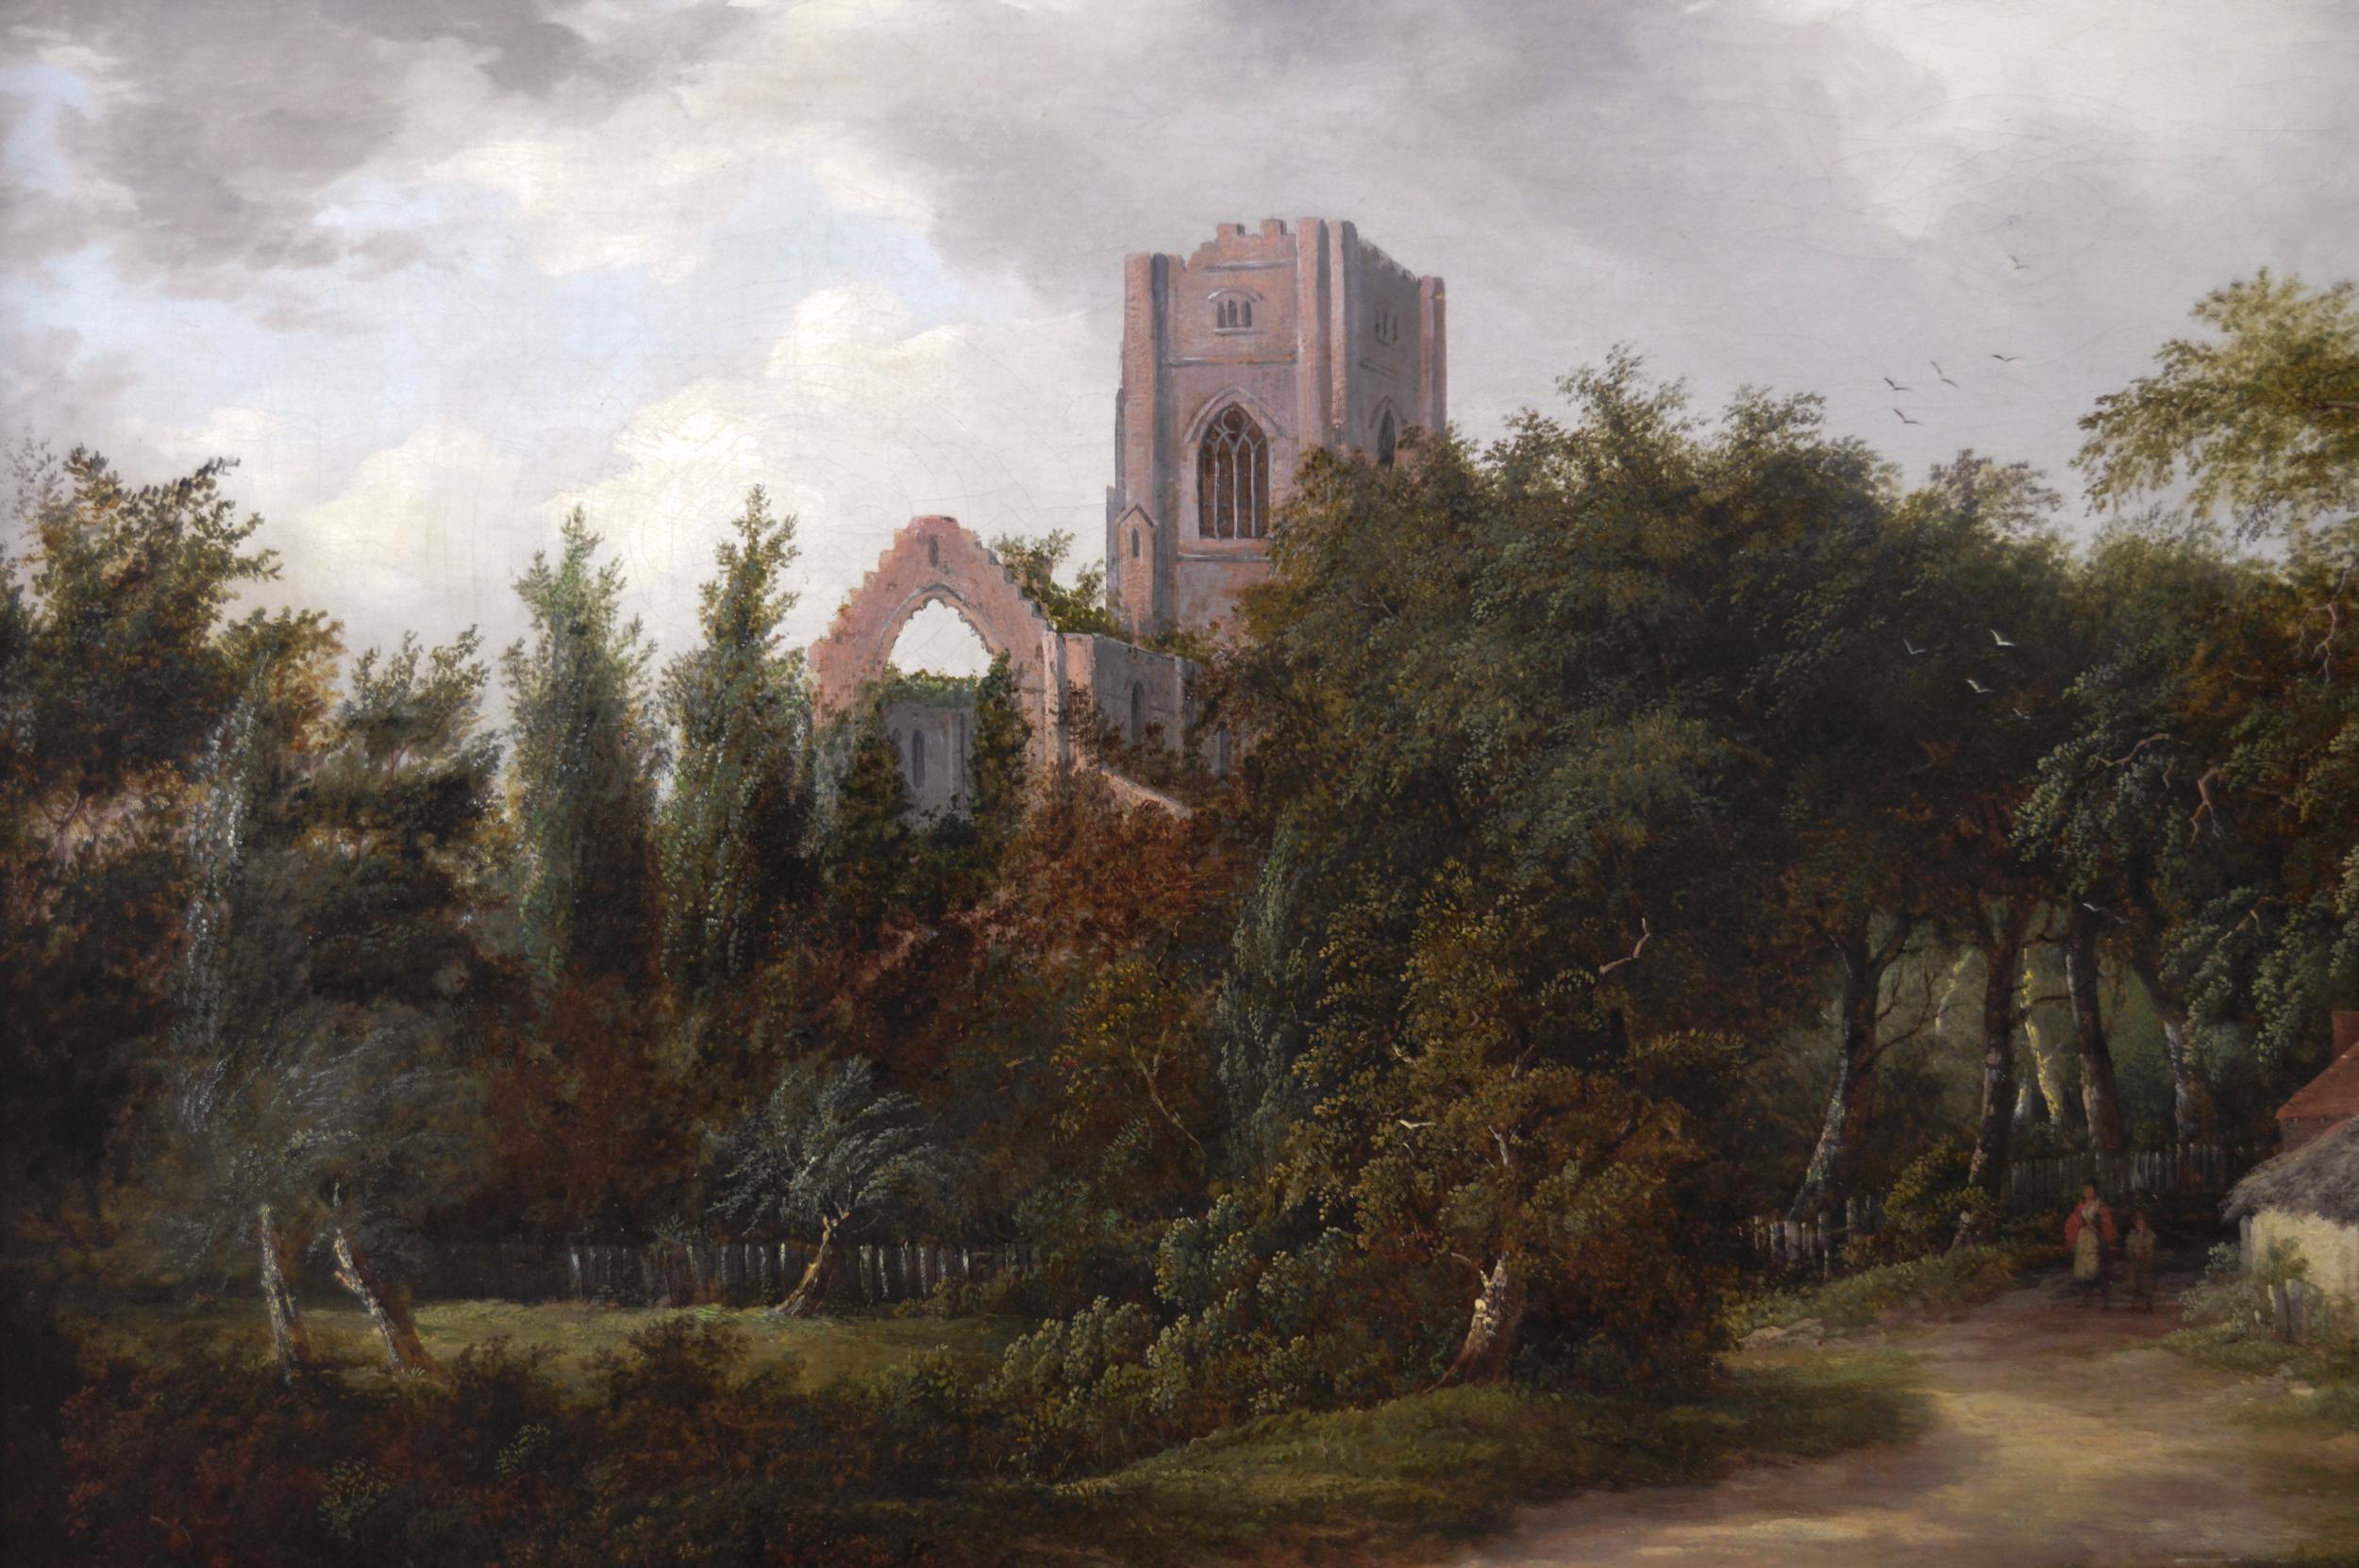 19th Century landscape oil painting of figures in a lane near Abbey ruins  - Victorian Painting by Edward Williams